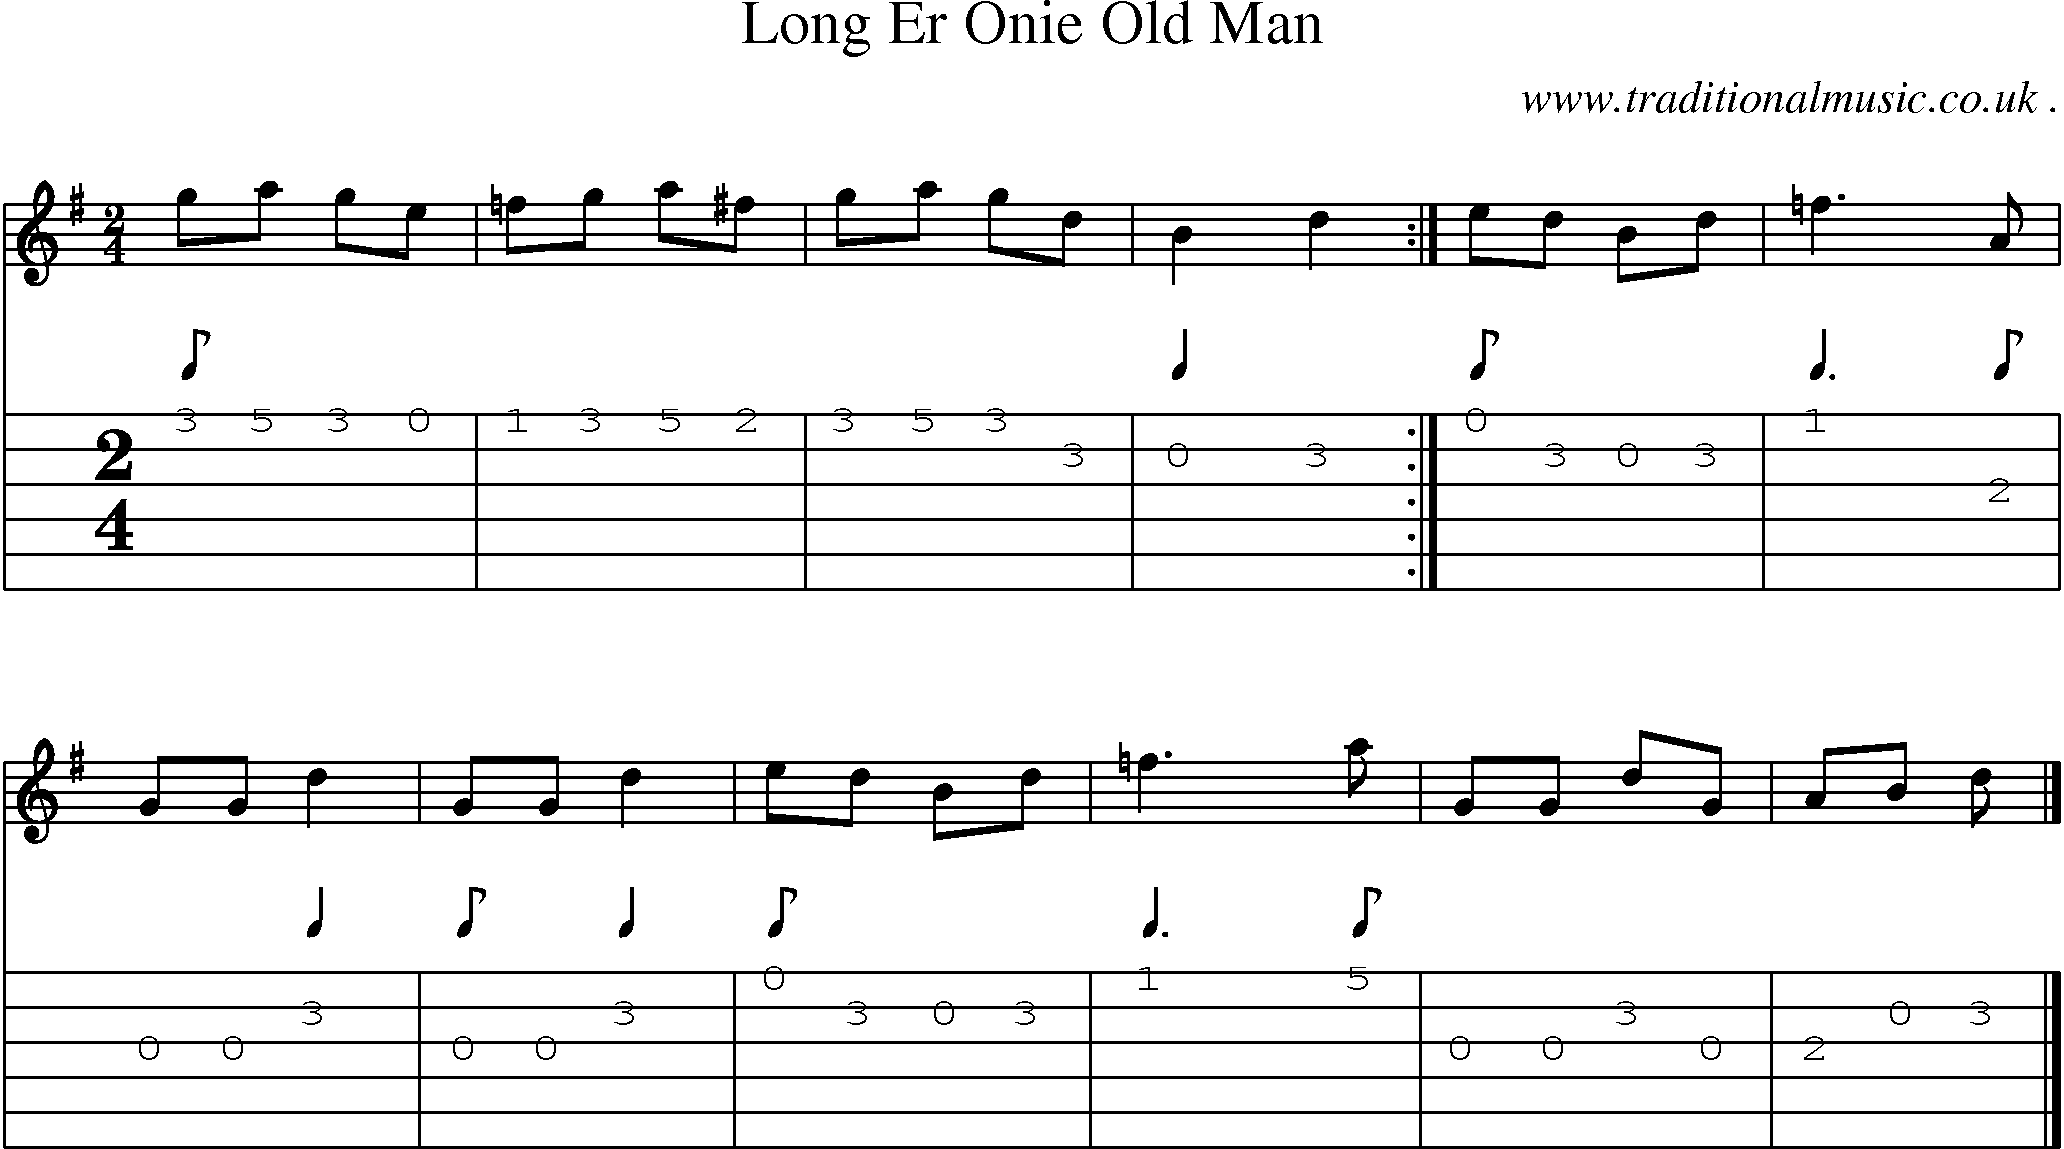 Sheet-music  score, Chords and Guitar Tabs for Long Er Onie Old Man